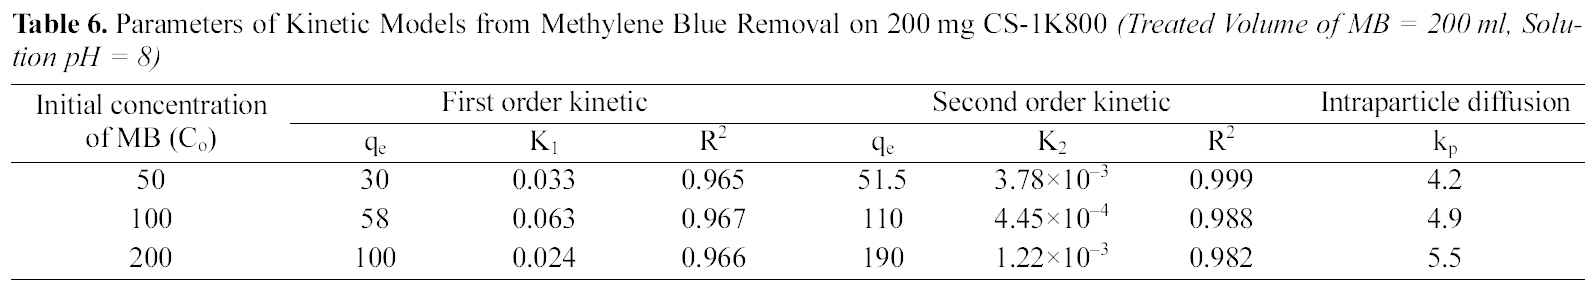 Parameters of Kinetic Models from Methylene Blue Removal on 200 mg CS-1K800 (Treated Volume of MB = 200 ml Solution pH = 8)